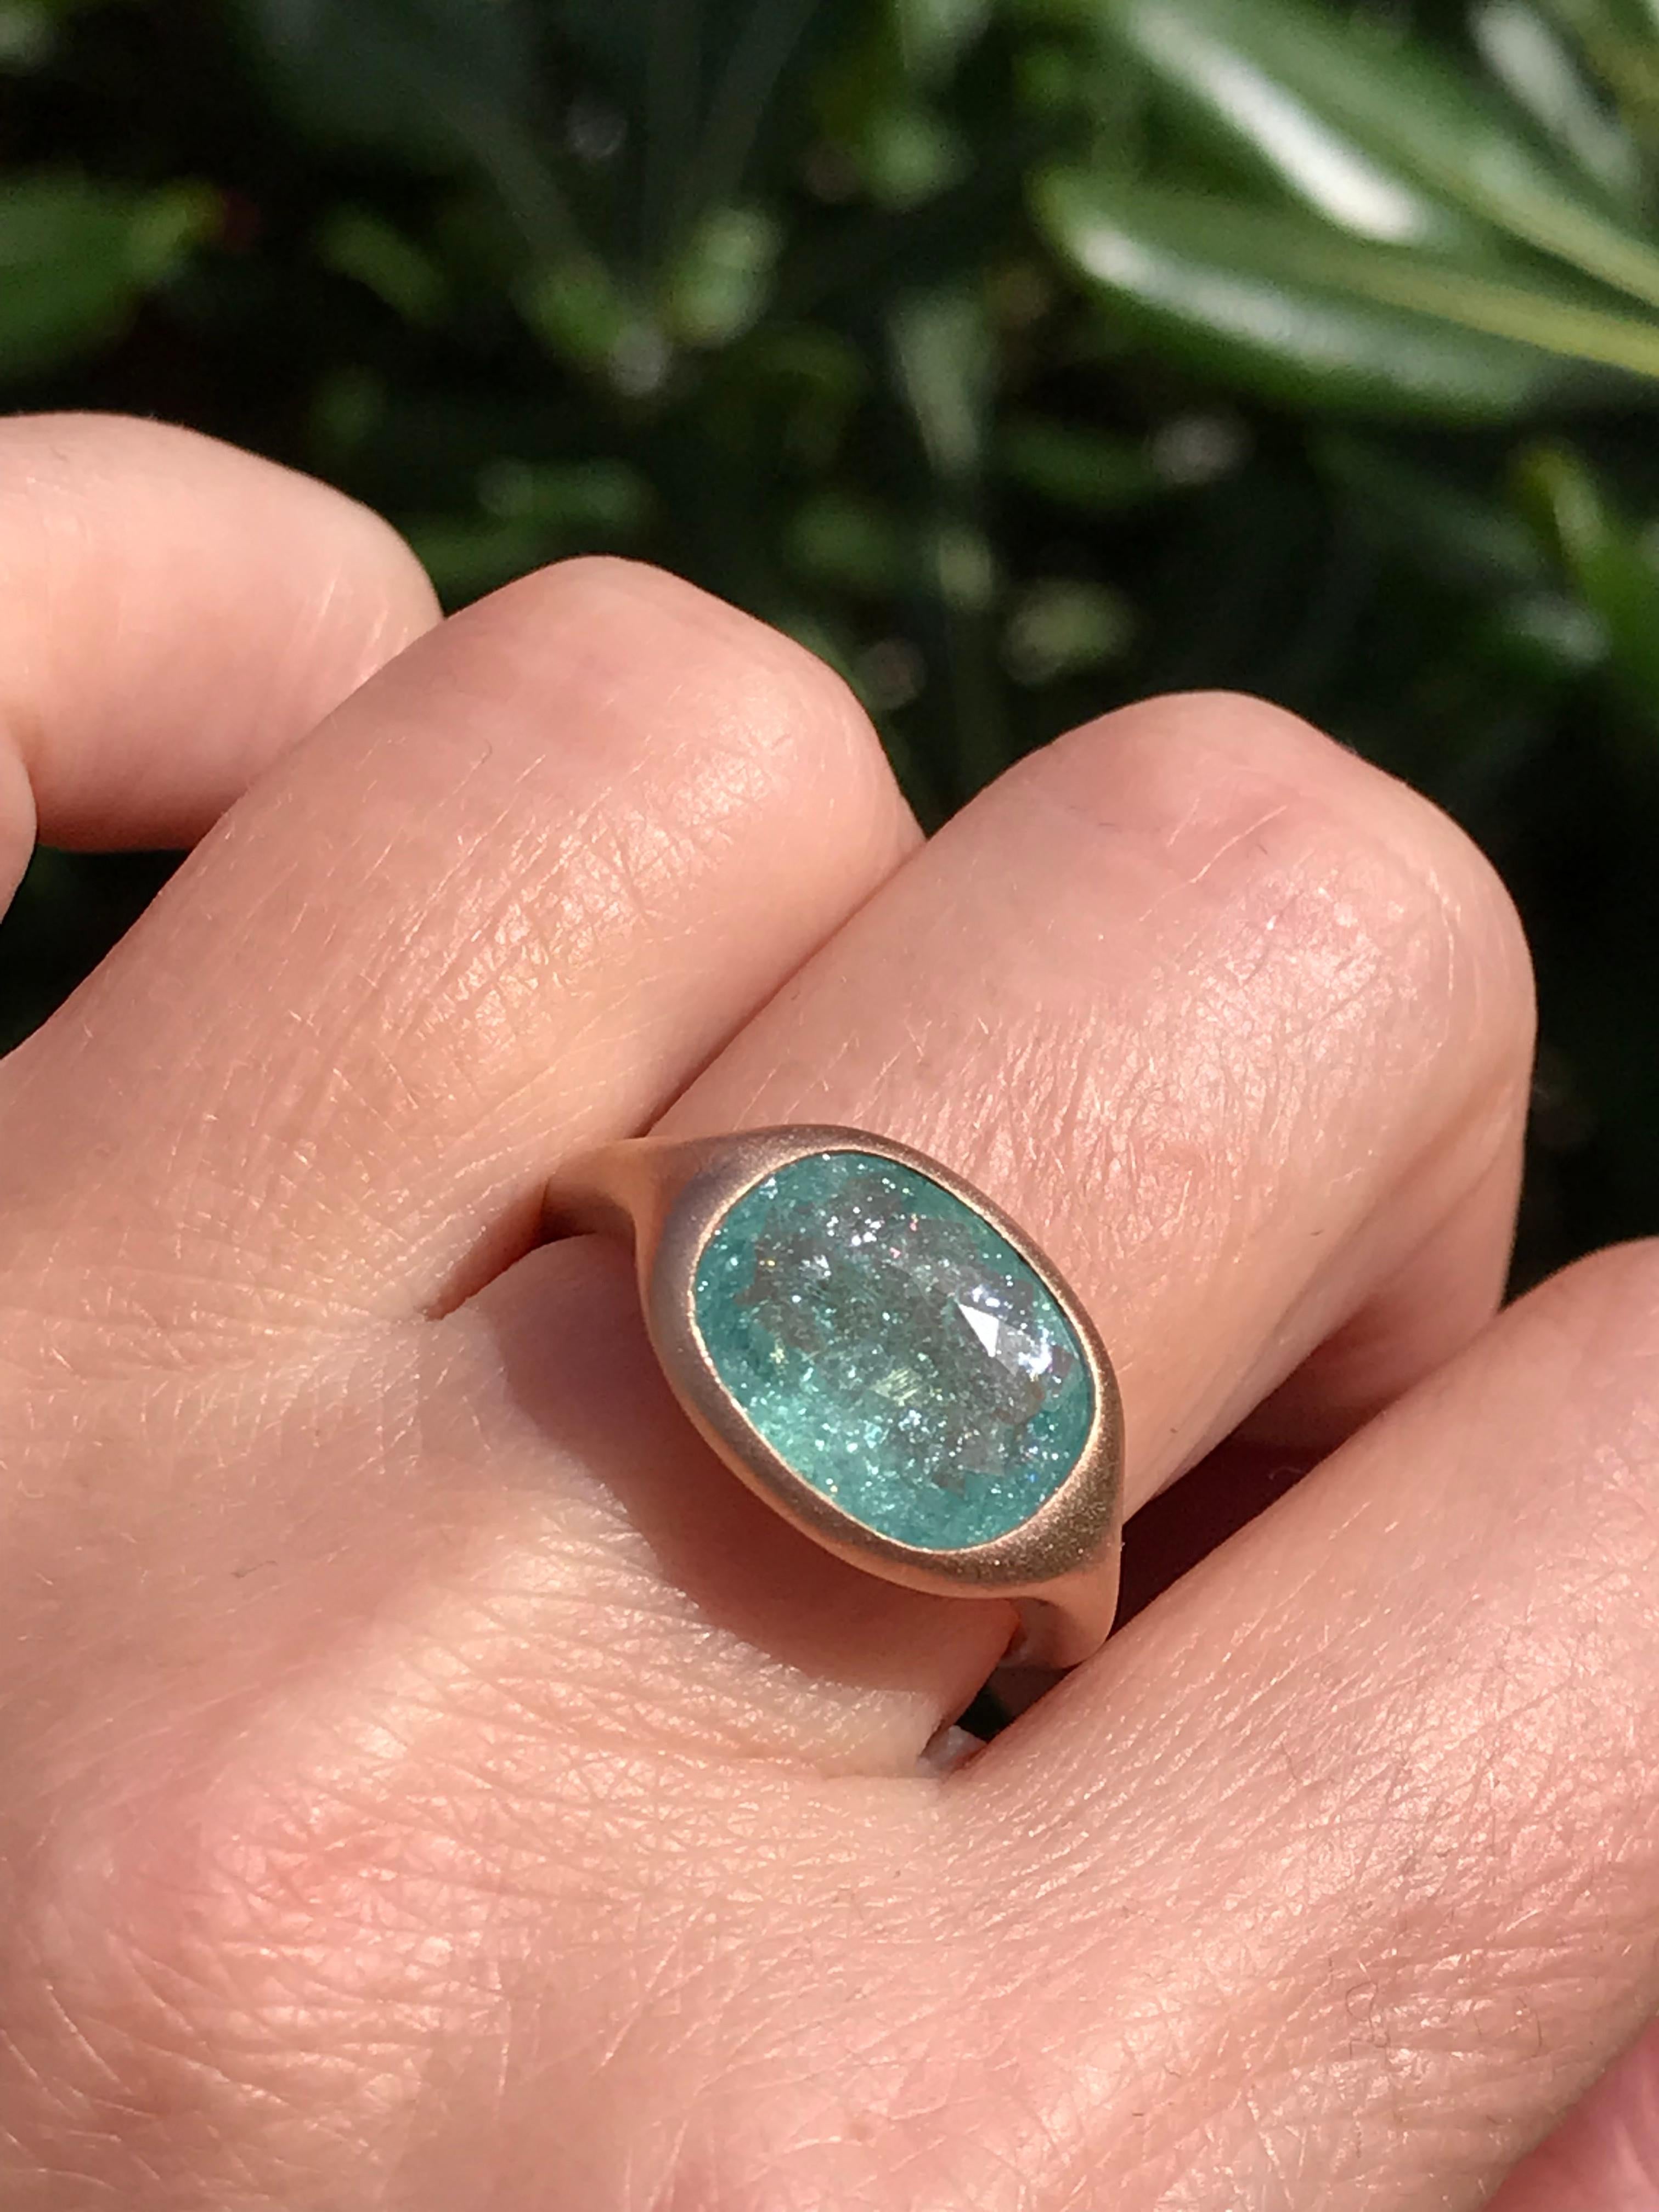 Dalben design  18k rose gold satin finishing ring with a 3,79 carat bezel-set cushion faceted cut Paraiba Tourmaline from Mozambique. 
Ring size 7 USA - EU 54+ re-sizable to most finger sizes. 
Bezel stone dimensions :
height 11,1 mm
width 14,8